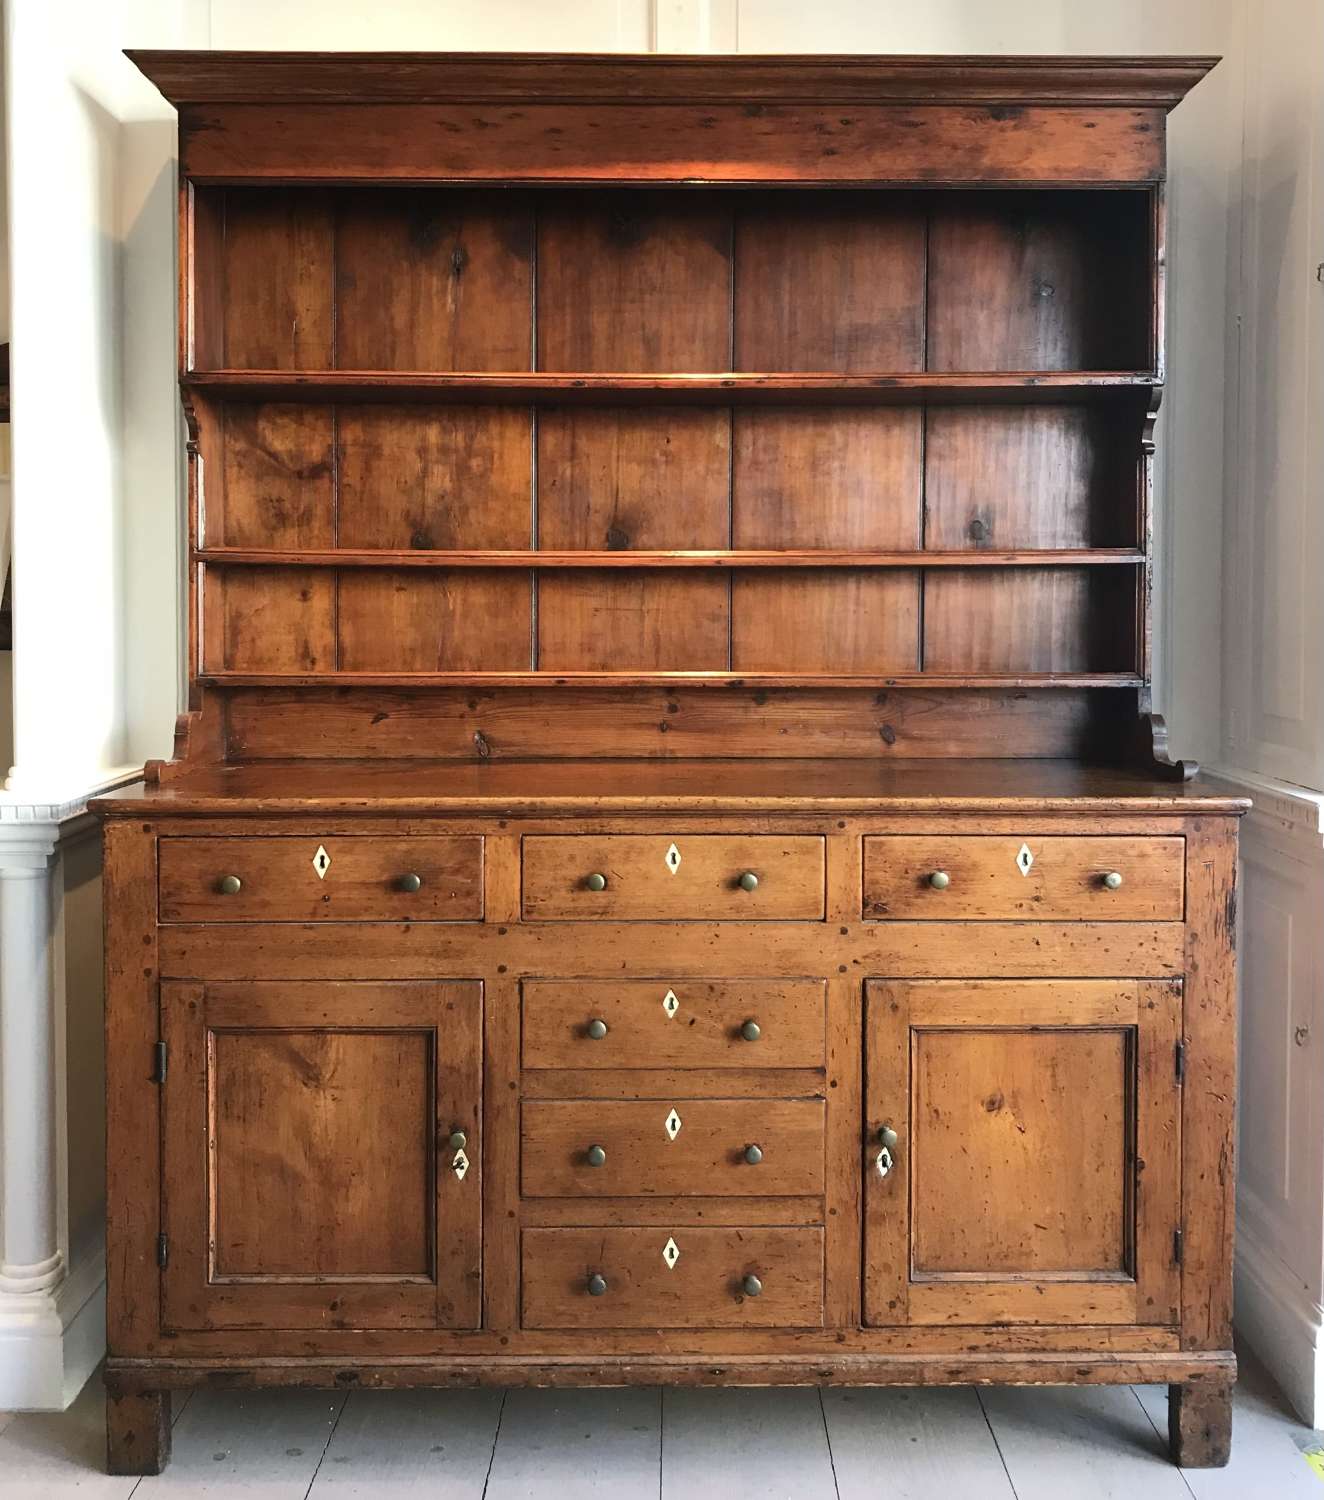 19th century kitchen dresser with great patina